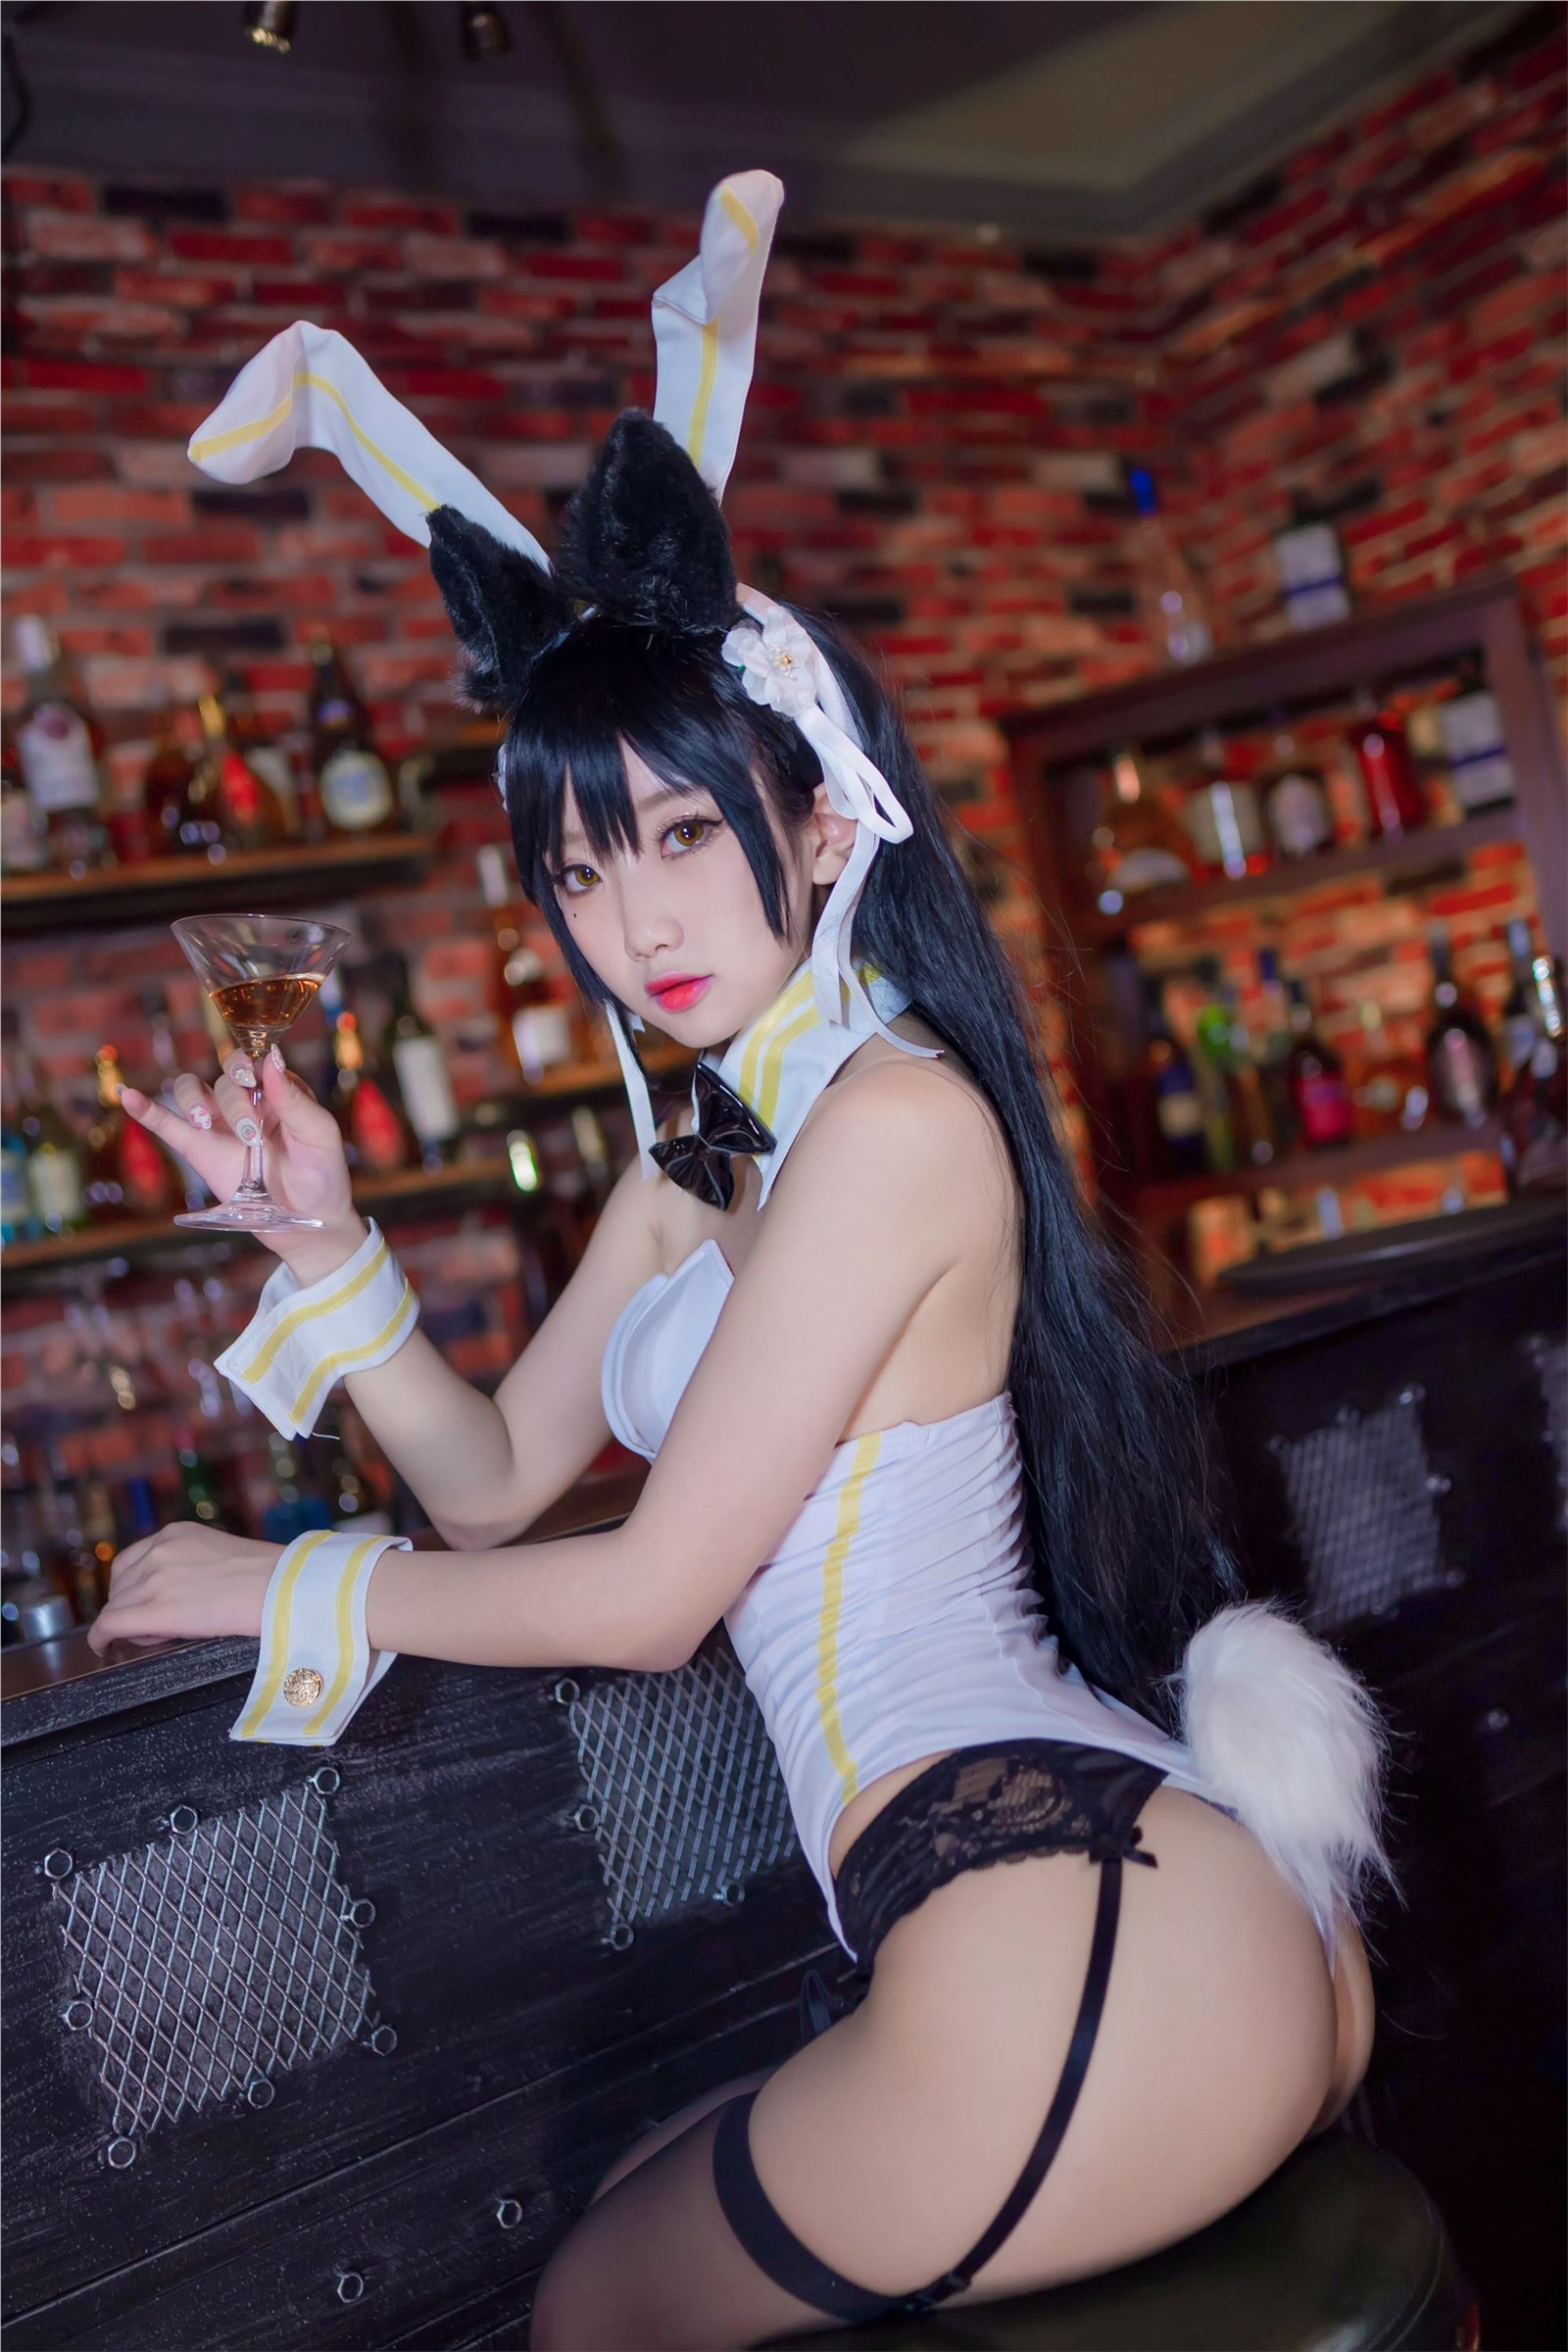 Cosplay is Yao in or not - bar Bunny(20)